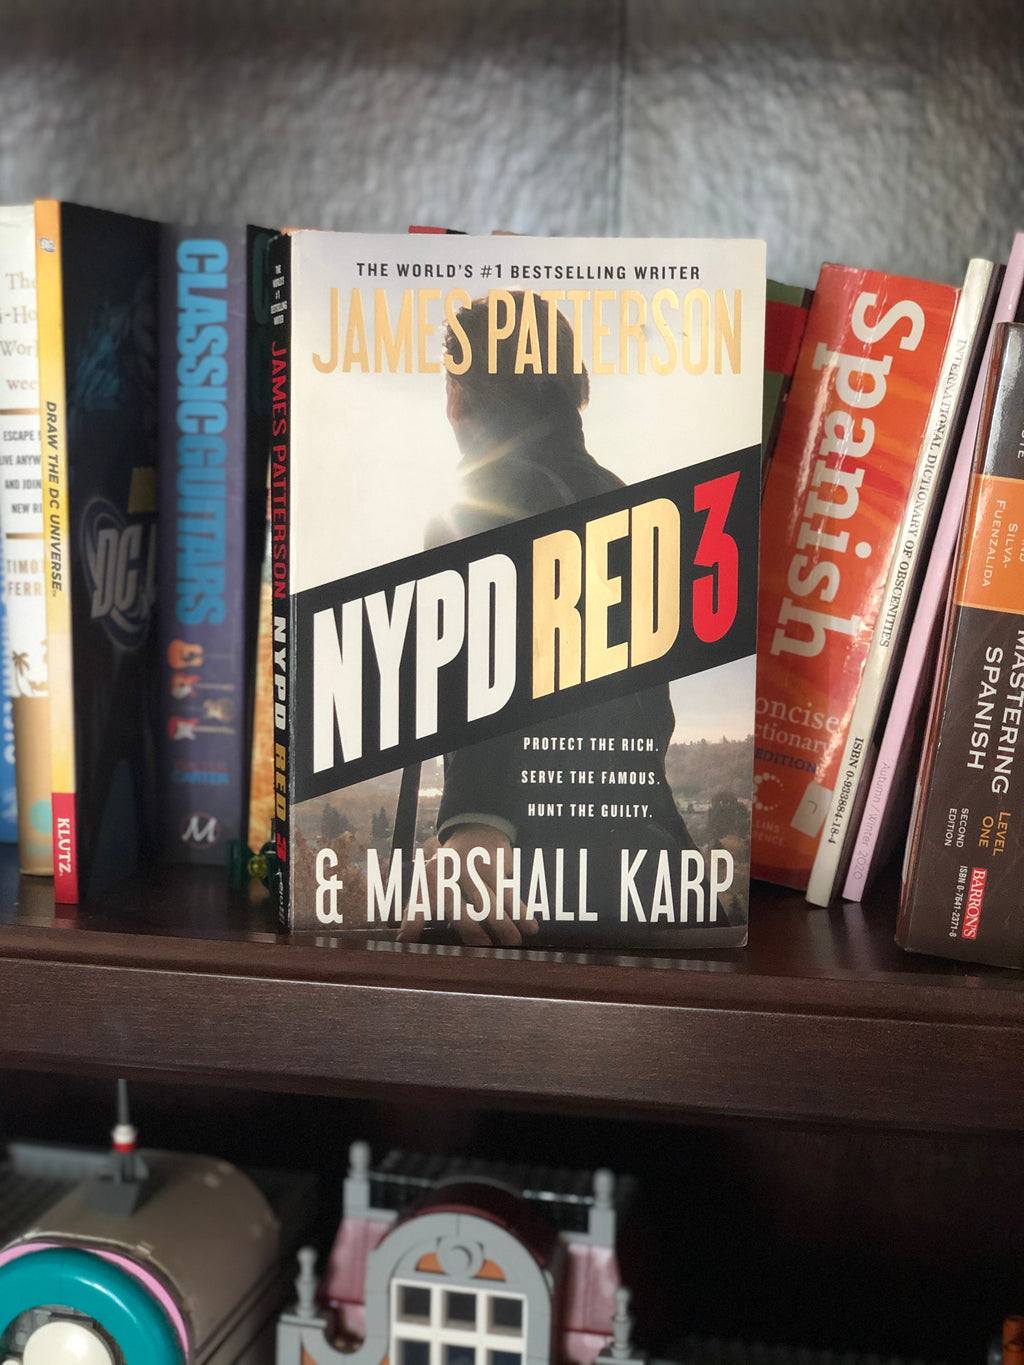 NYPD RED 3- By James Patterson & Marshall Karp